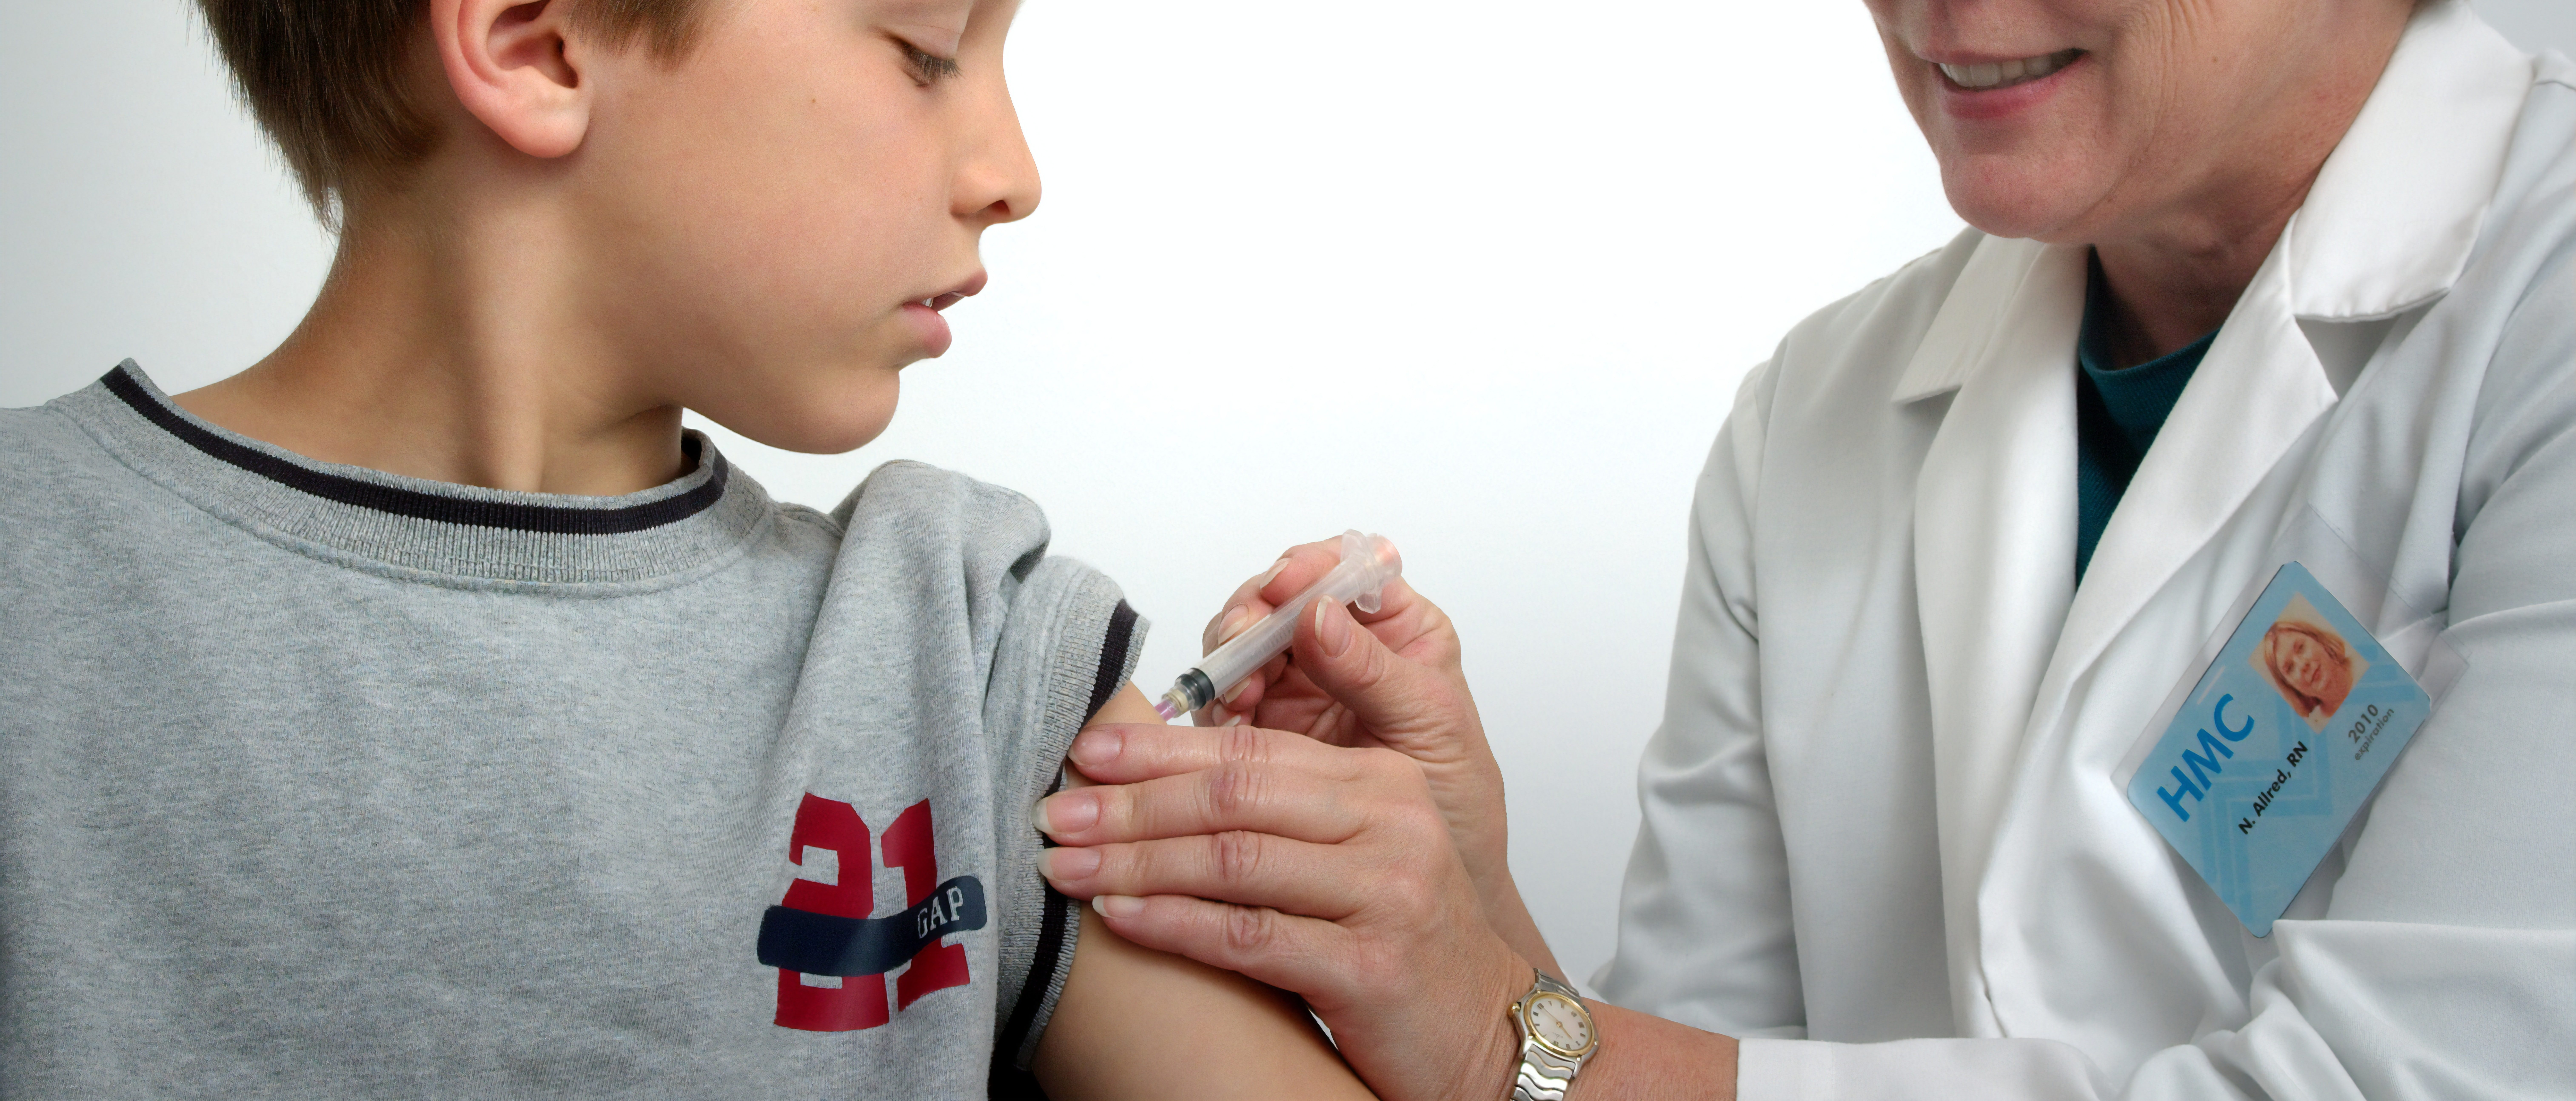 parents disagree on vaccination